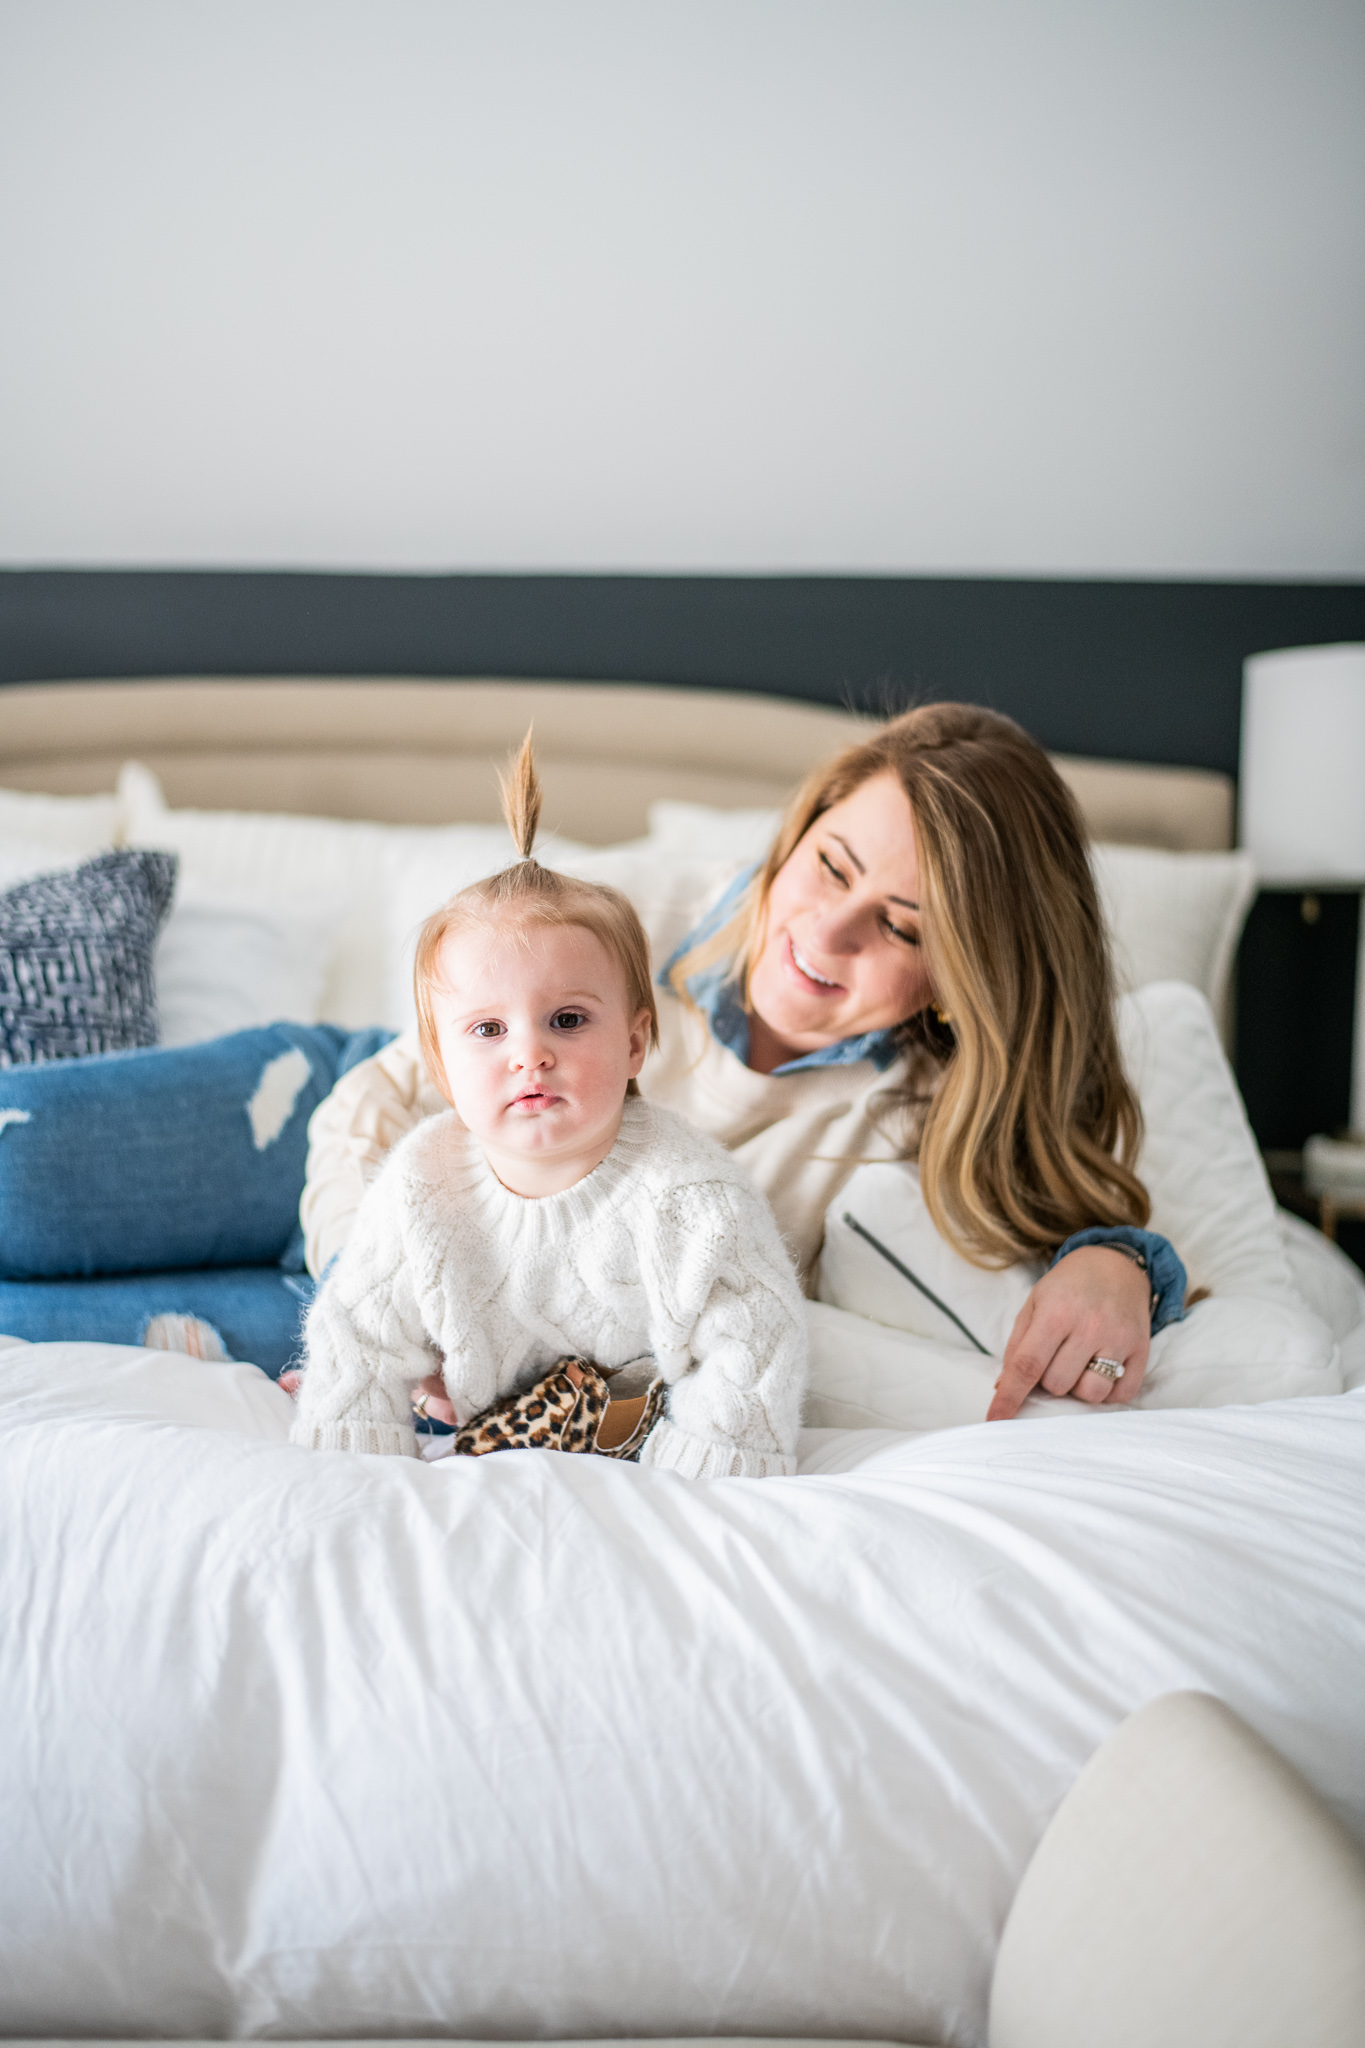 Tempur Pedic Pillows featured by top US lifestyle blog Coffee Beans and Bobby Pins; Image of woman playing this her daughter.